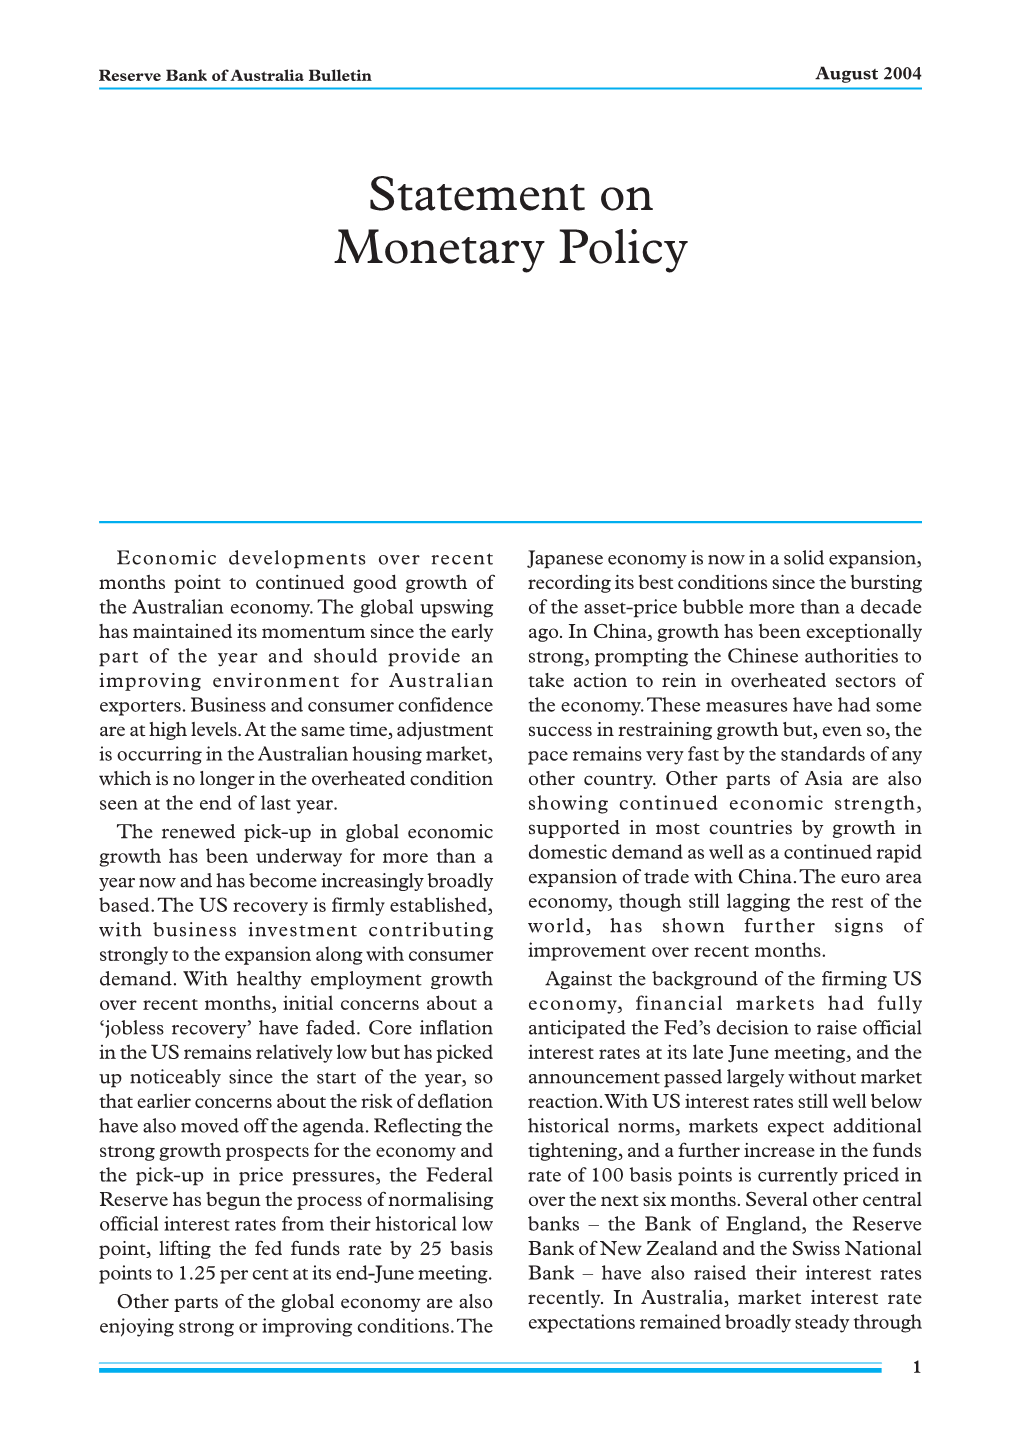 Statement on Monetary Policy